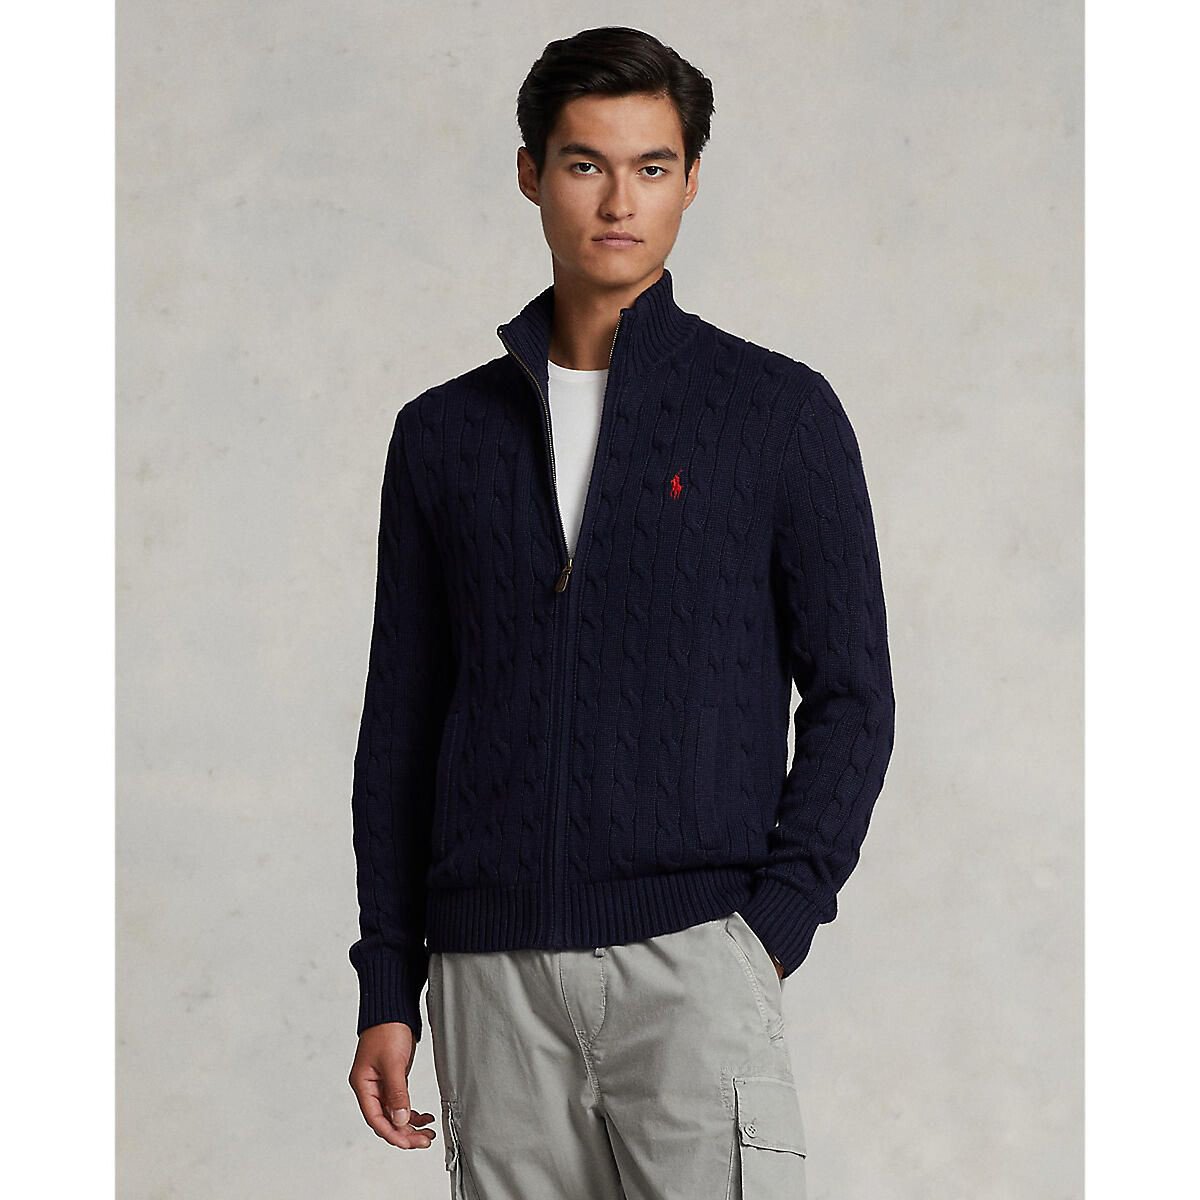 Image of Cotton Cable Knit Cardigan with Zip Fastening and Embroidered Logo